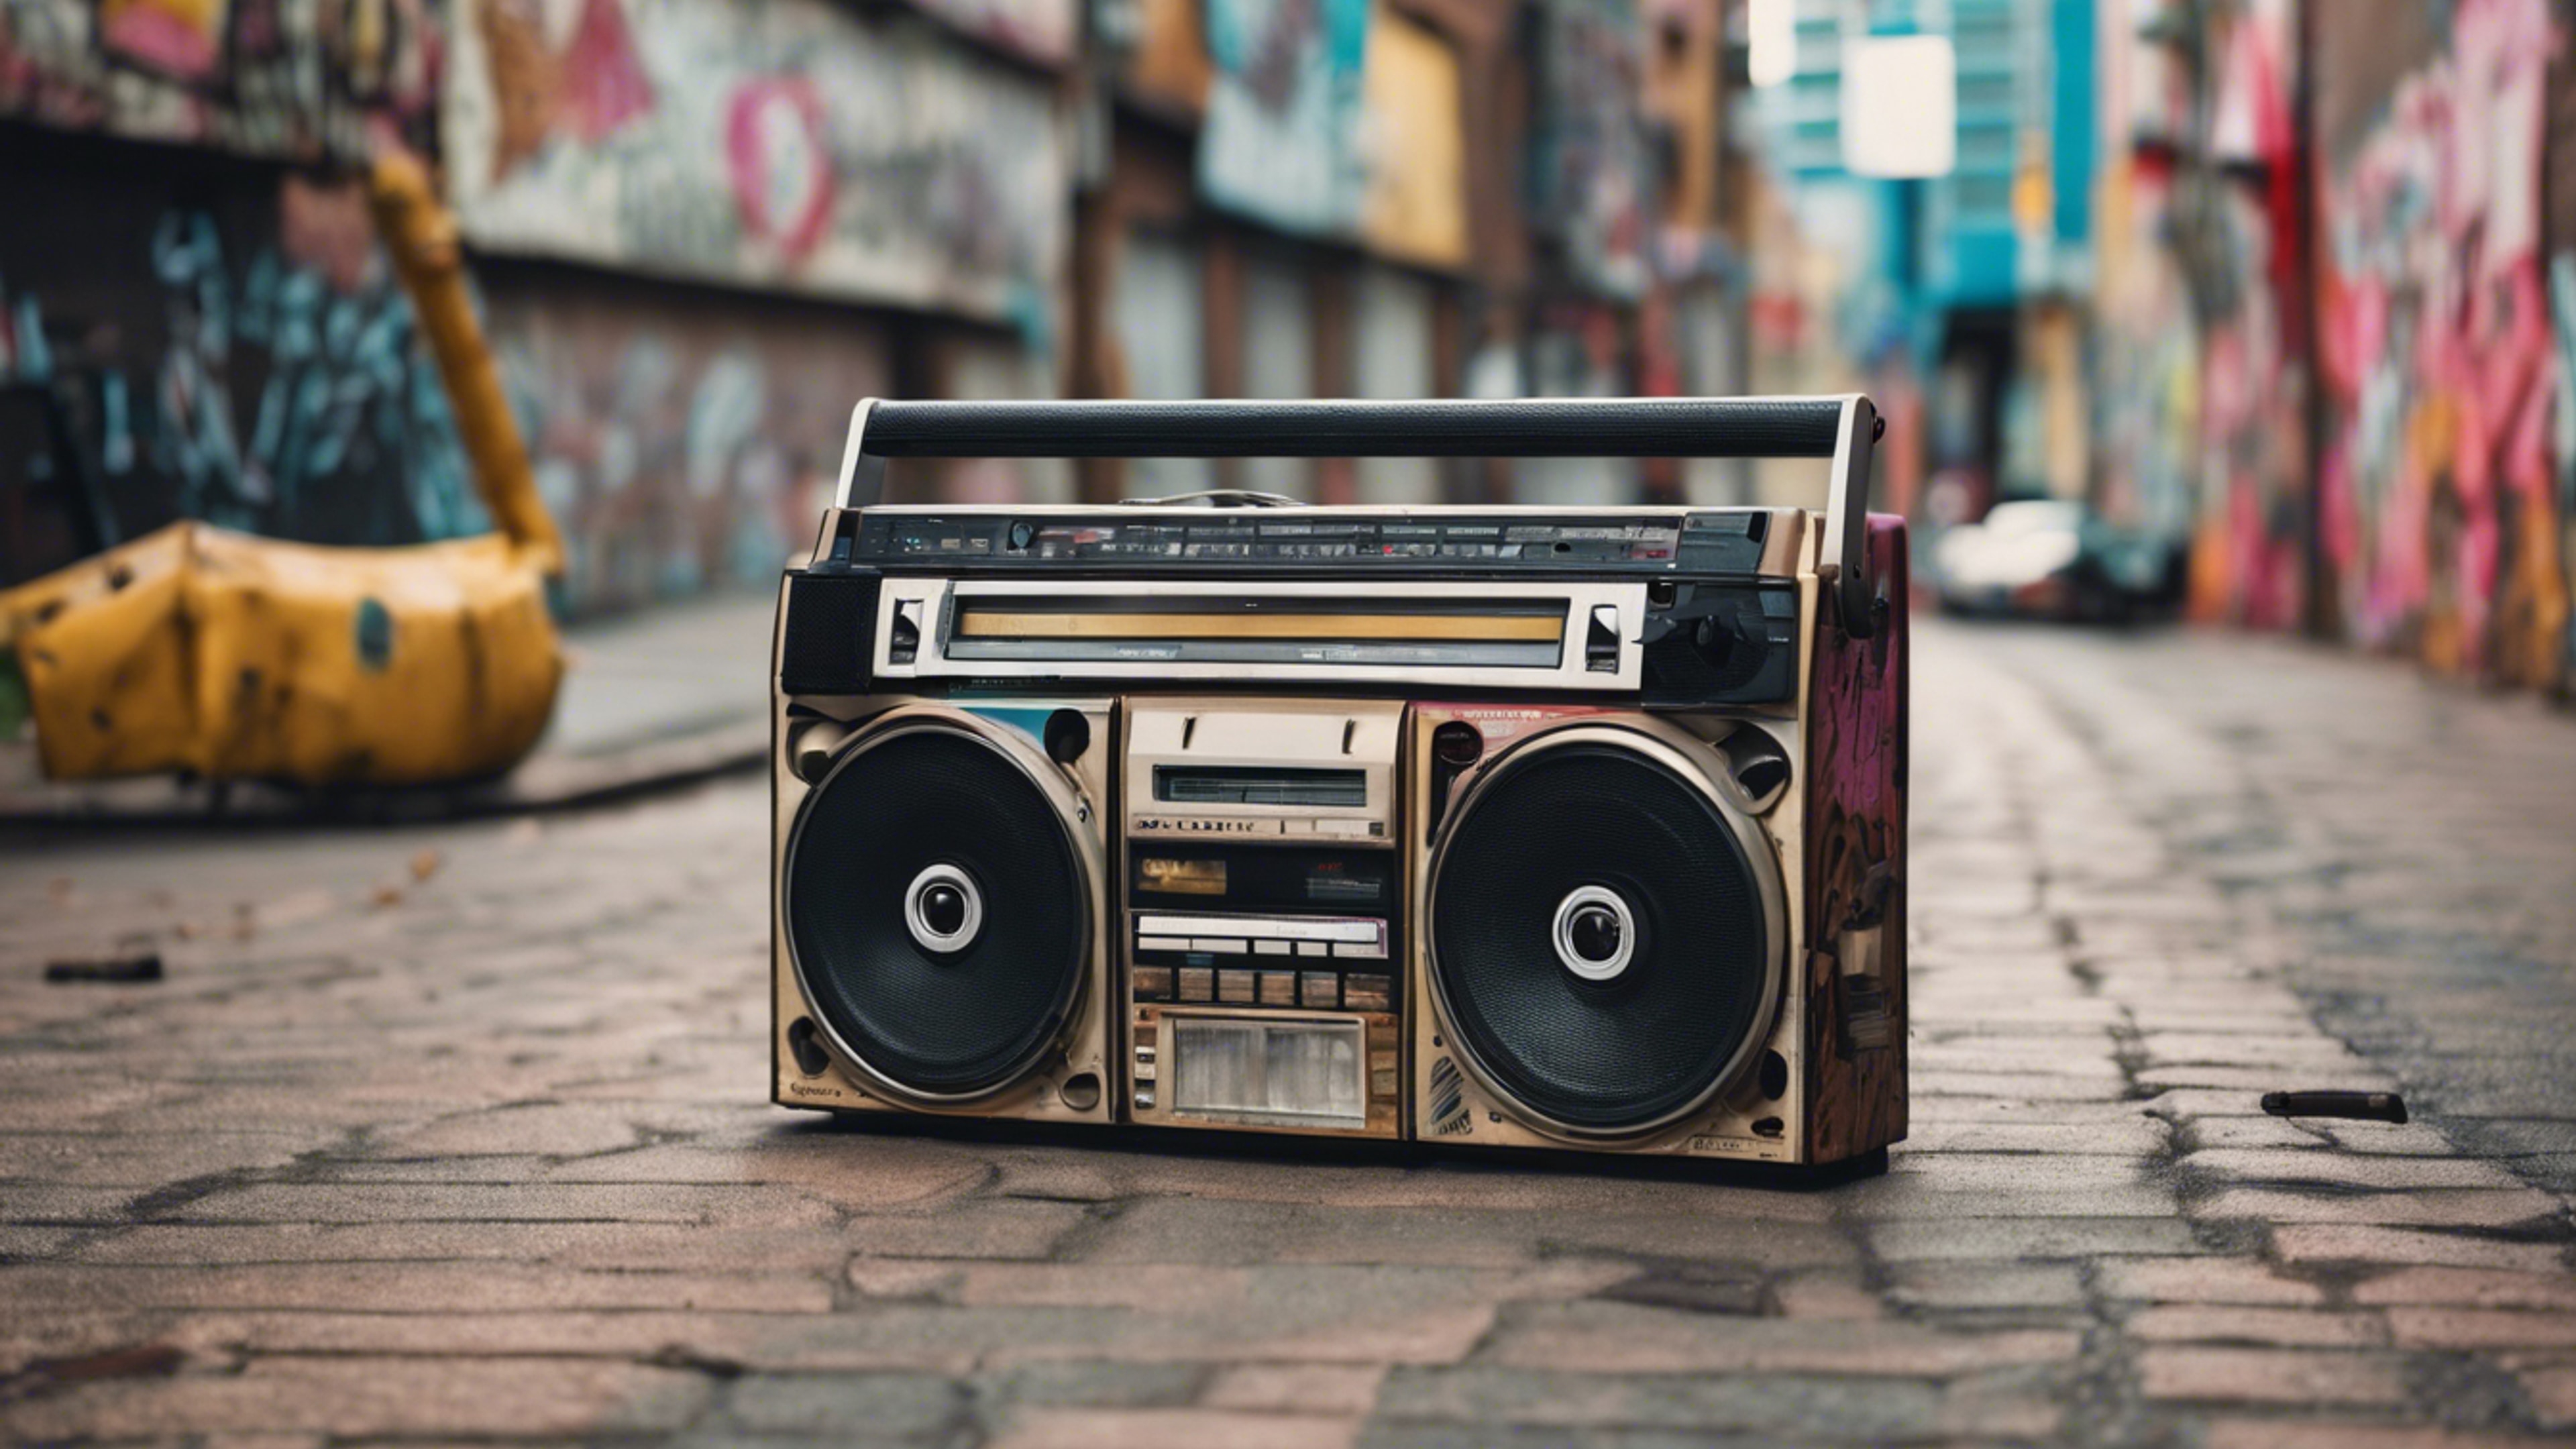 An old school 80s boombox playing cassette tapes on a graffitied street. Tapet[63e13512f9e44708b5c0]